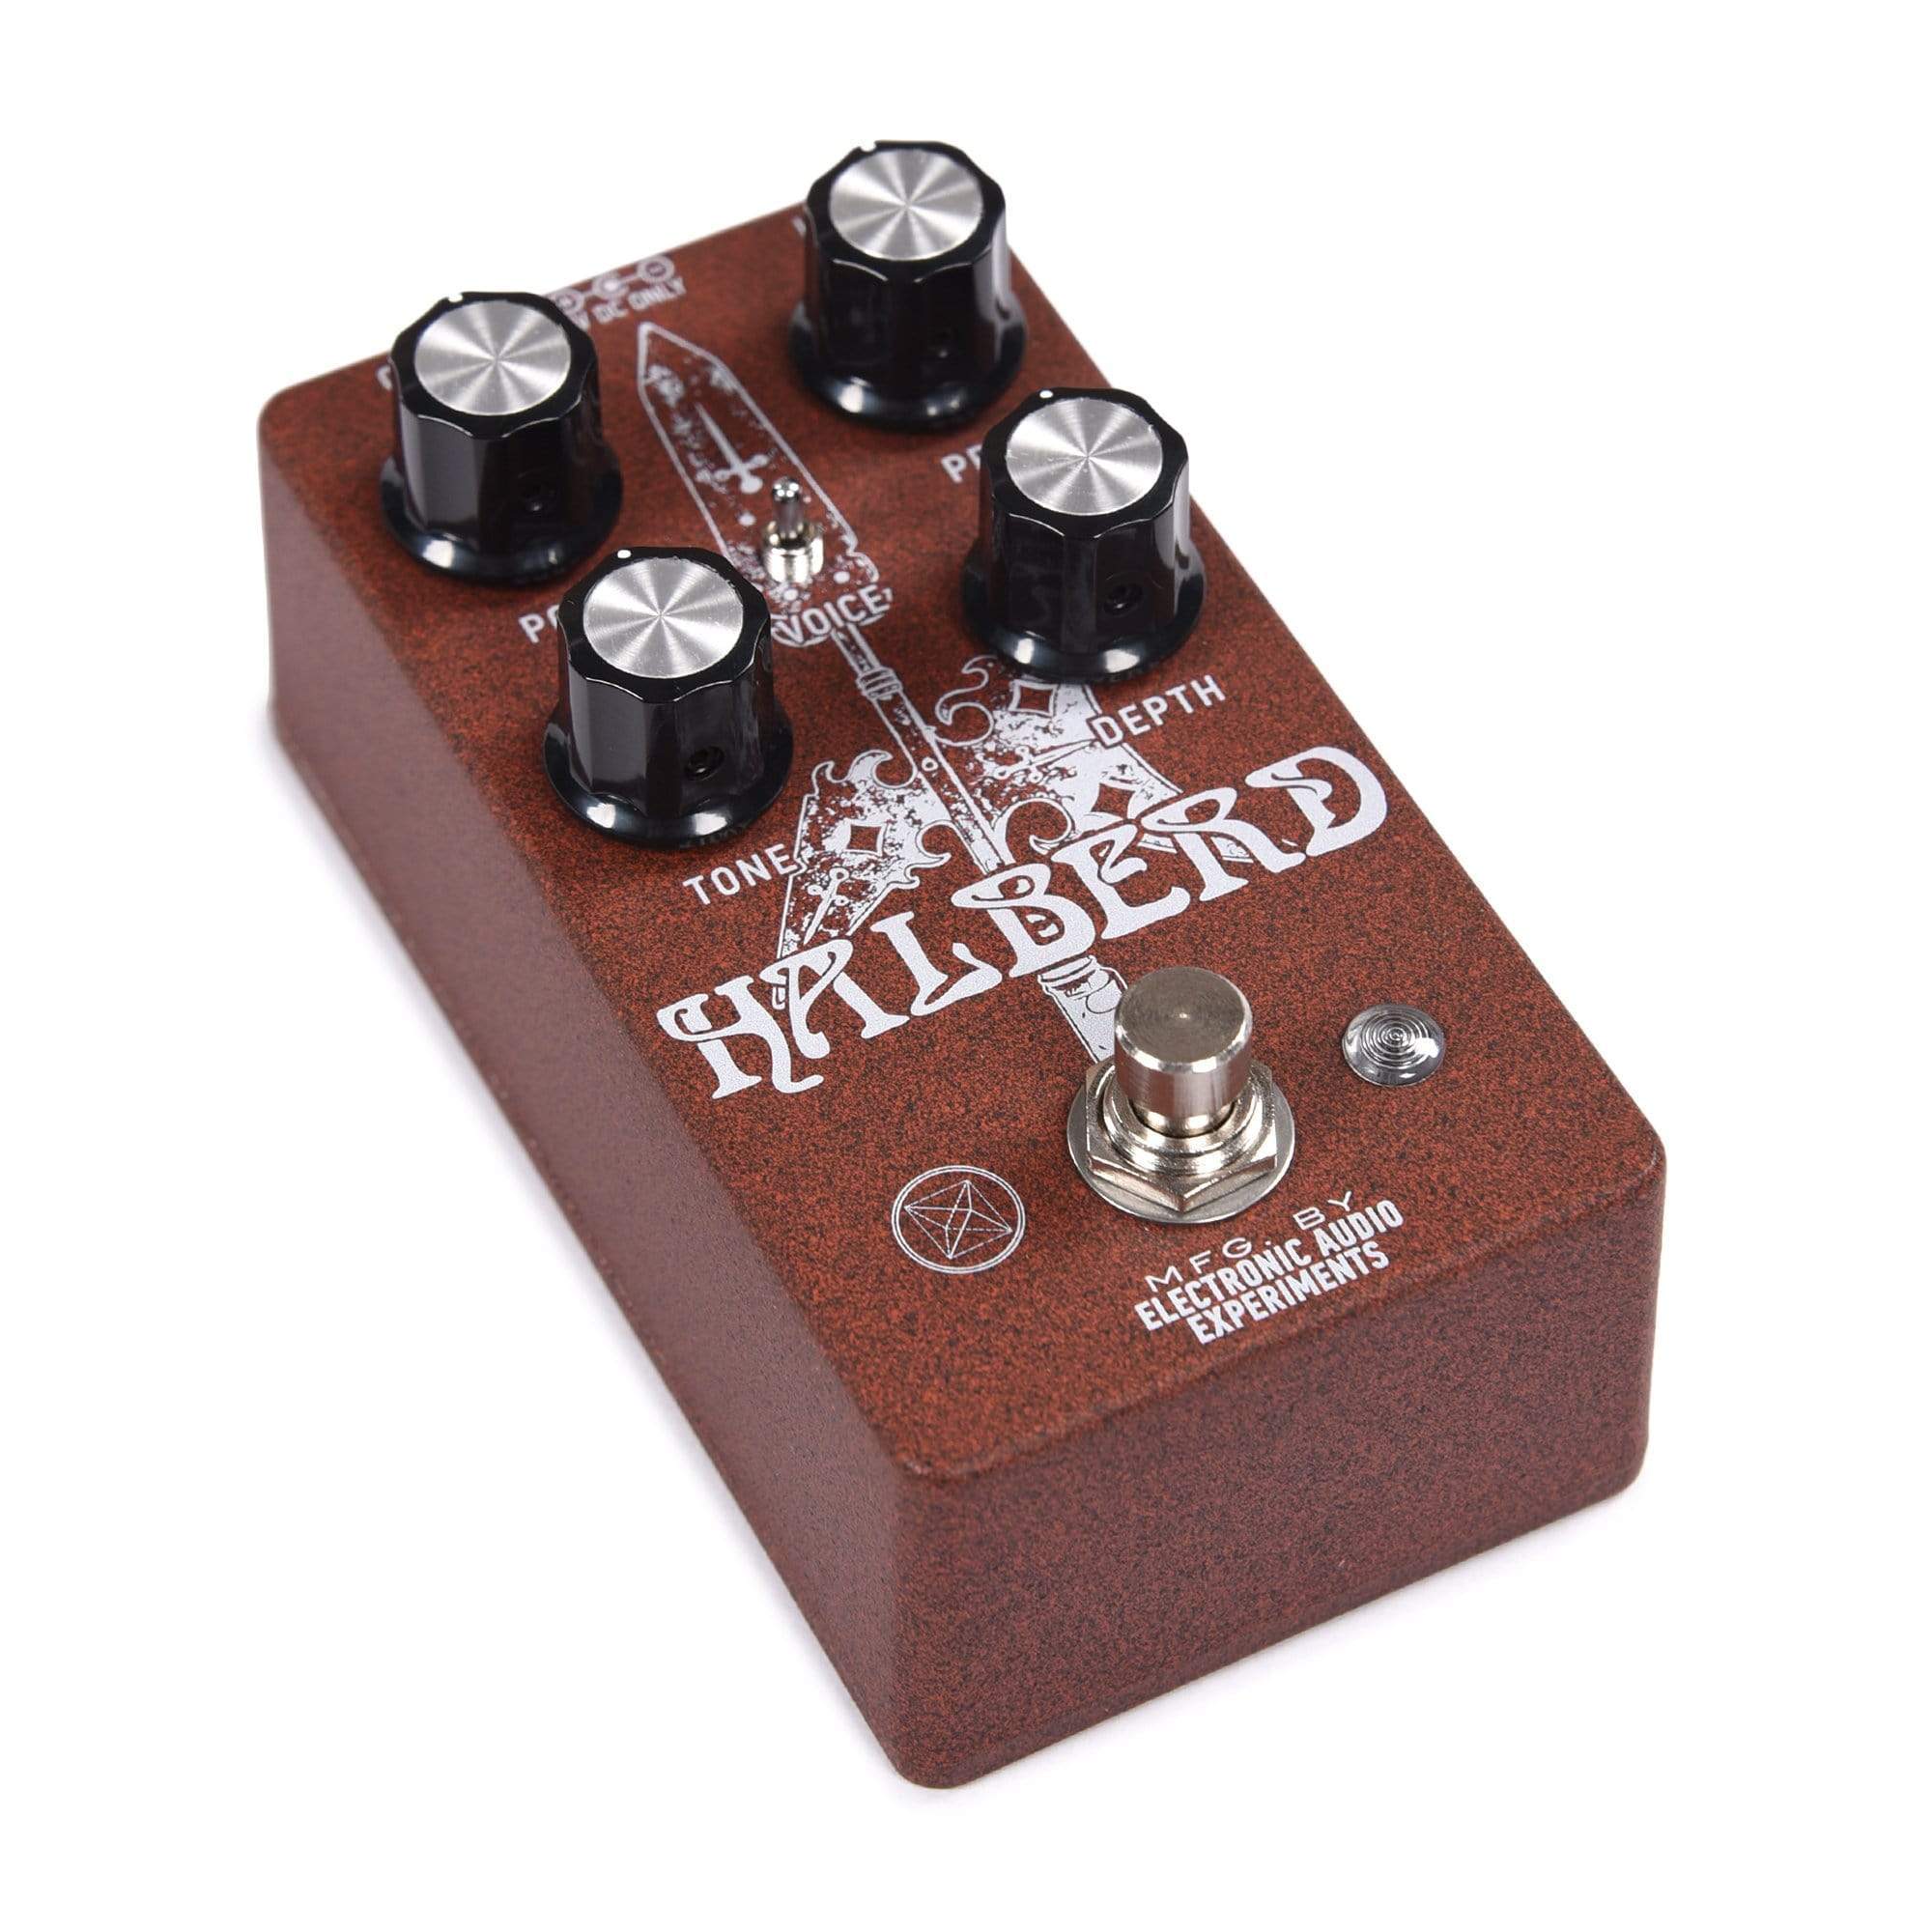 Electronic Audio Experiments Halberd v2 Overdrive Pedal